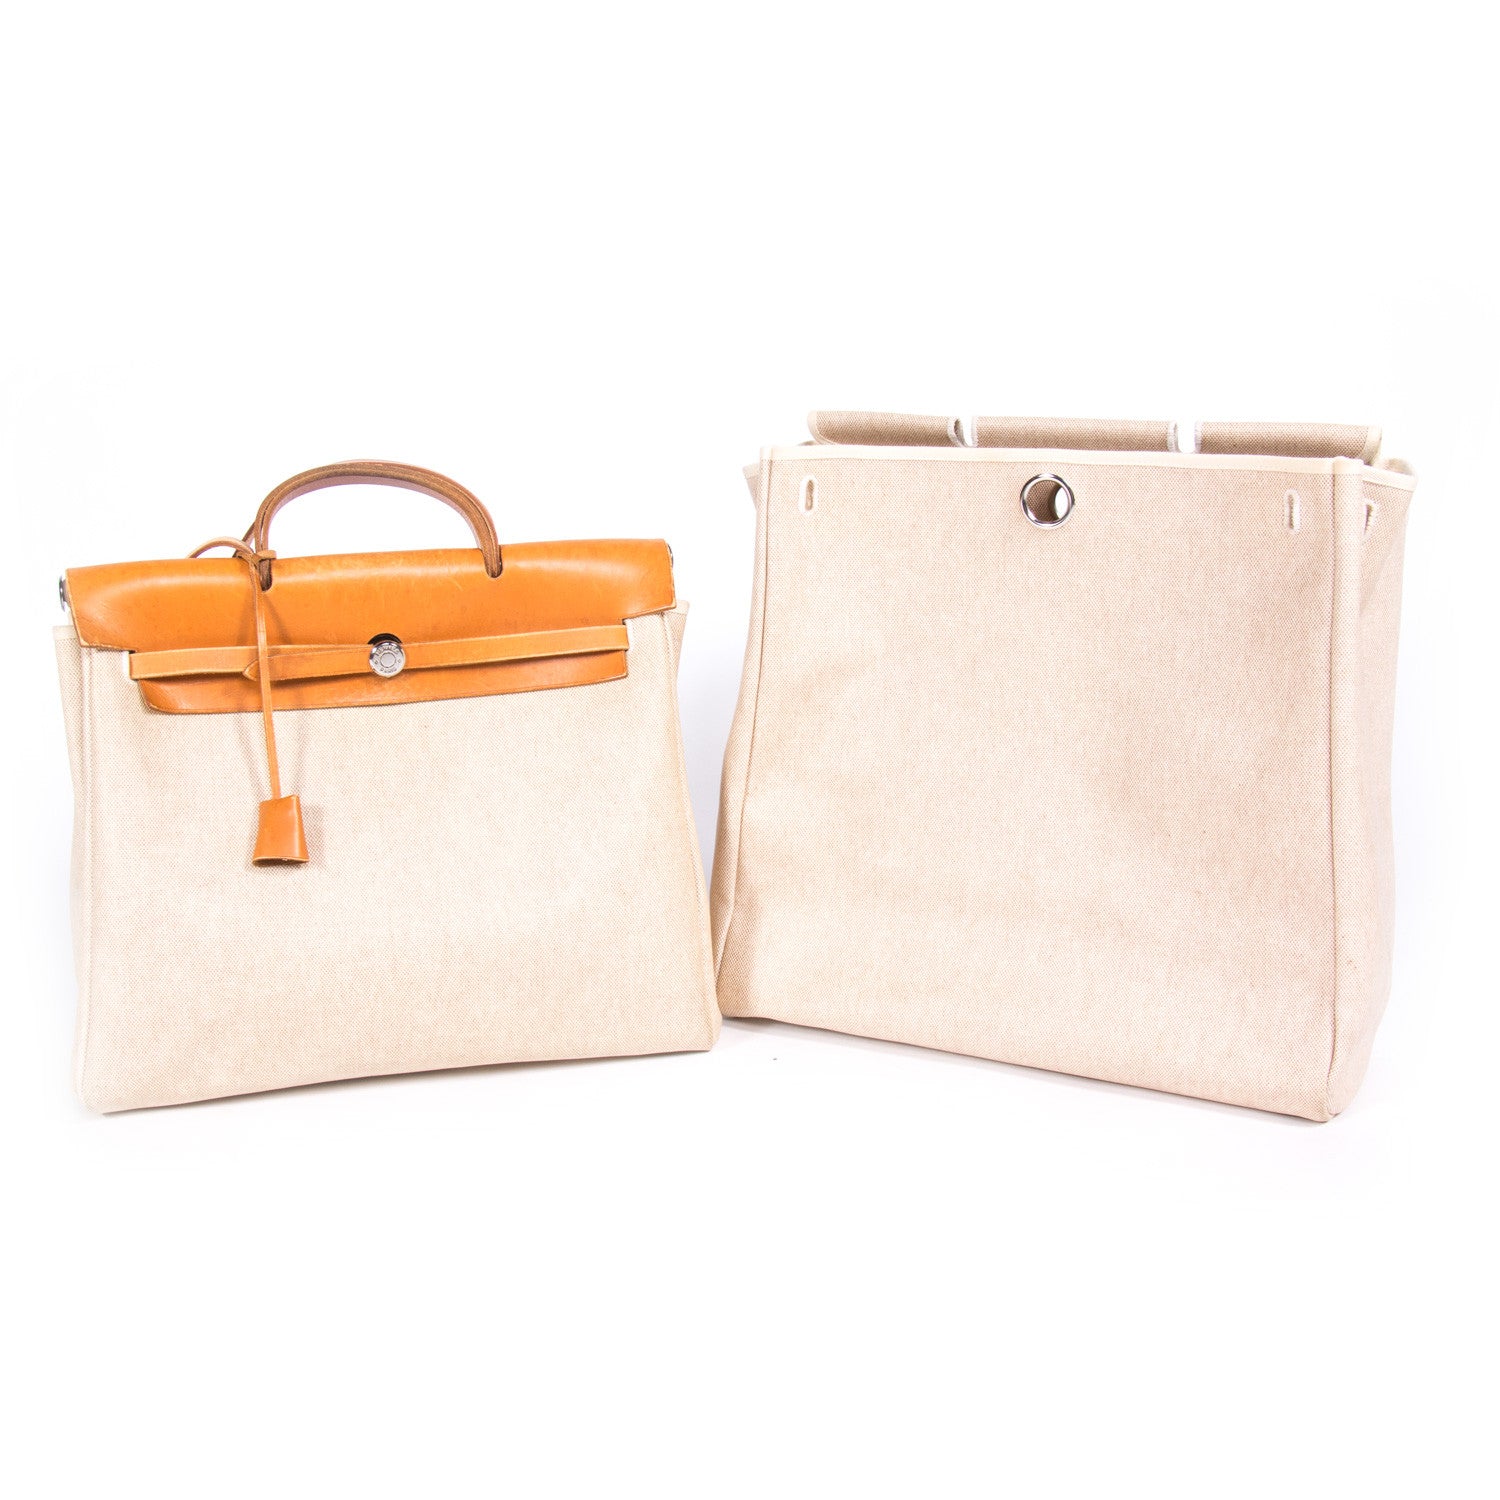 Shop authentic Hermes Herbag GM at revogue for just USD 1,299.00